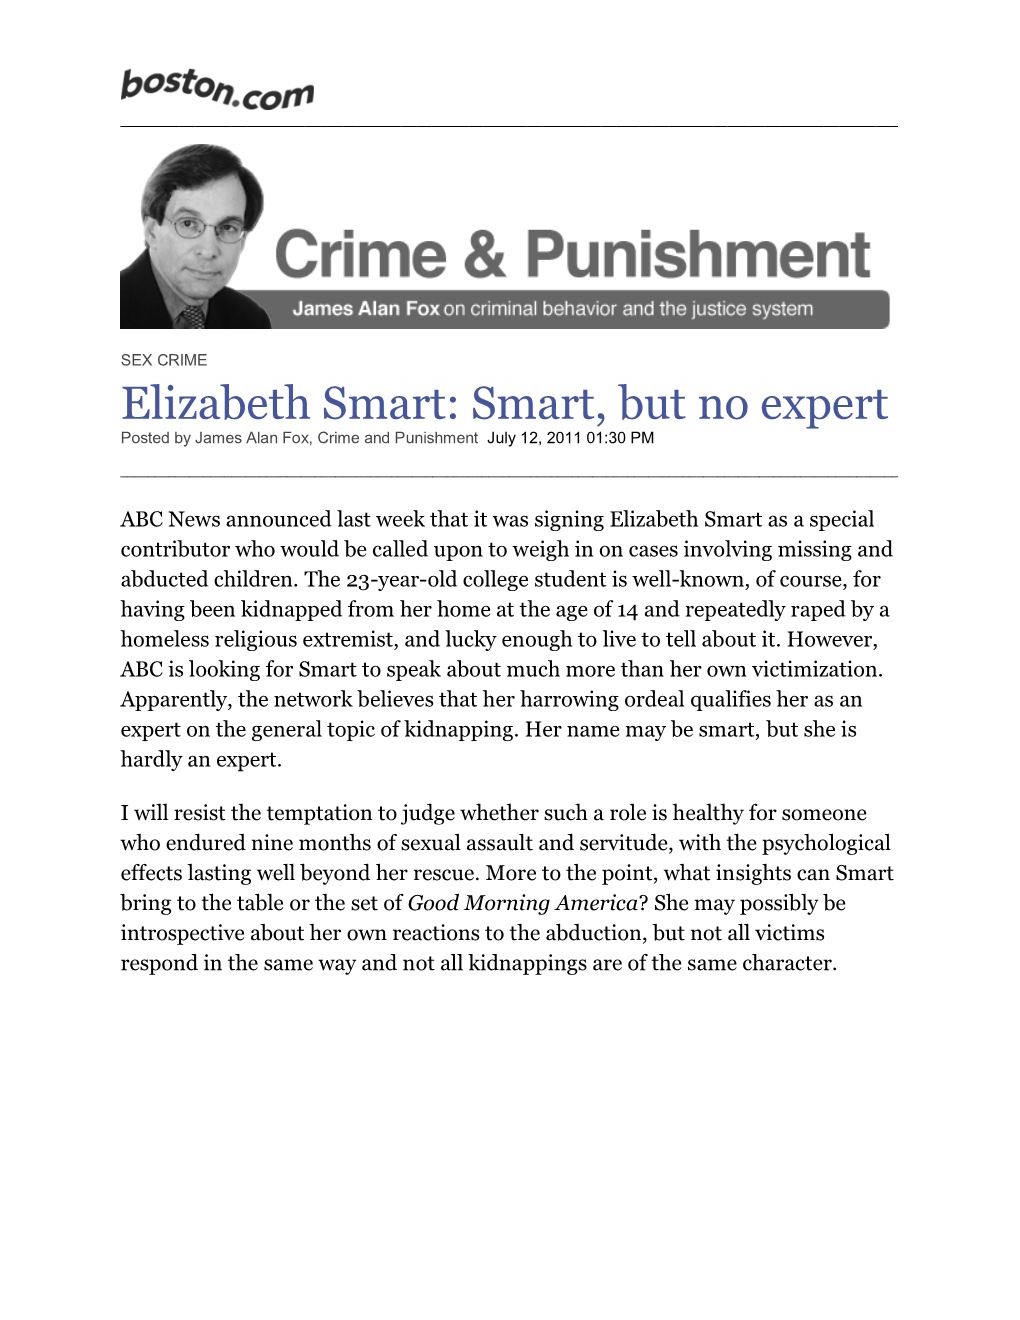 Elizabeth Smart: Smart, but No Expert Posted by James Alan Fox, Crime and Punishment July 12, 2011 01:30 PM